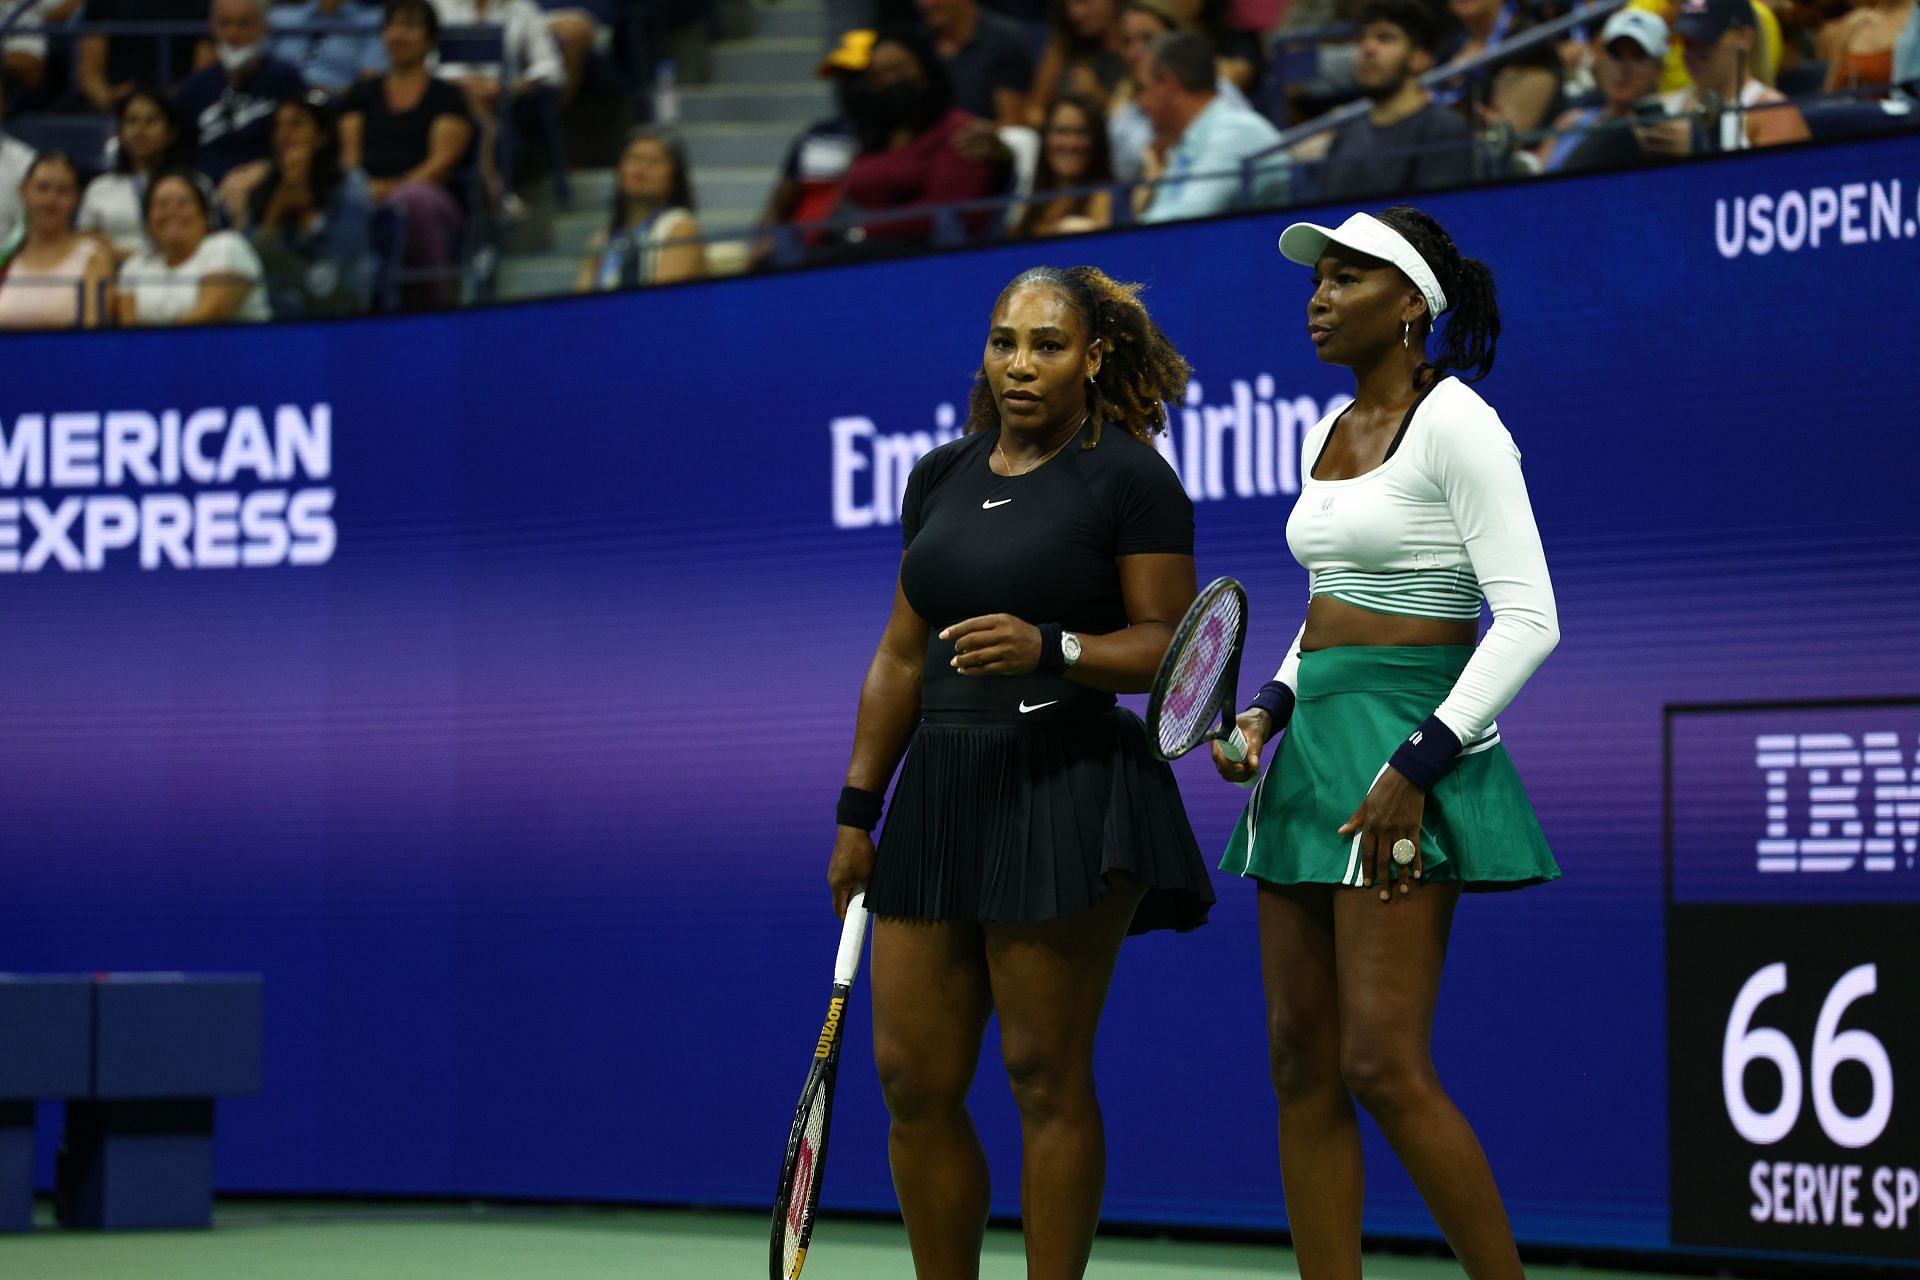 The Williams sisters at the 2022 US Open 